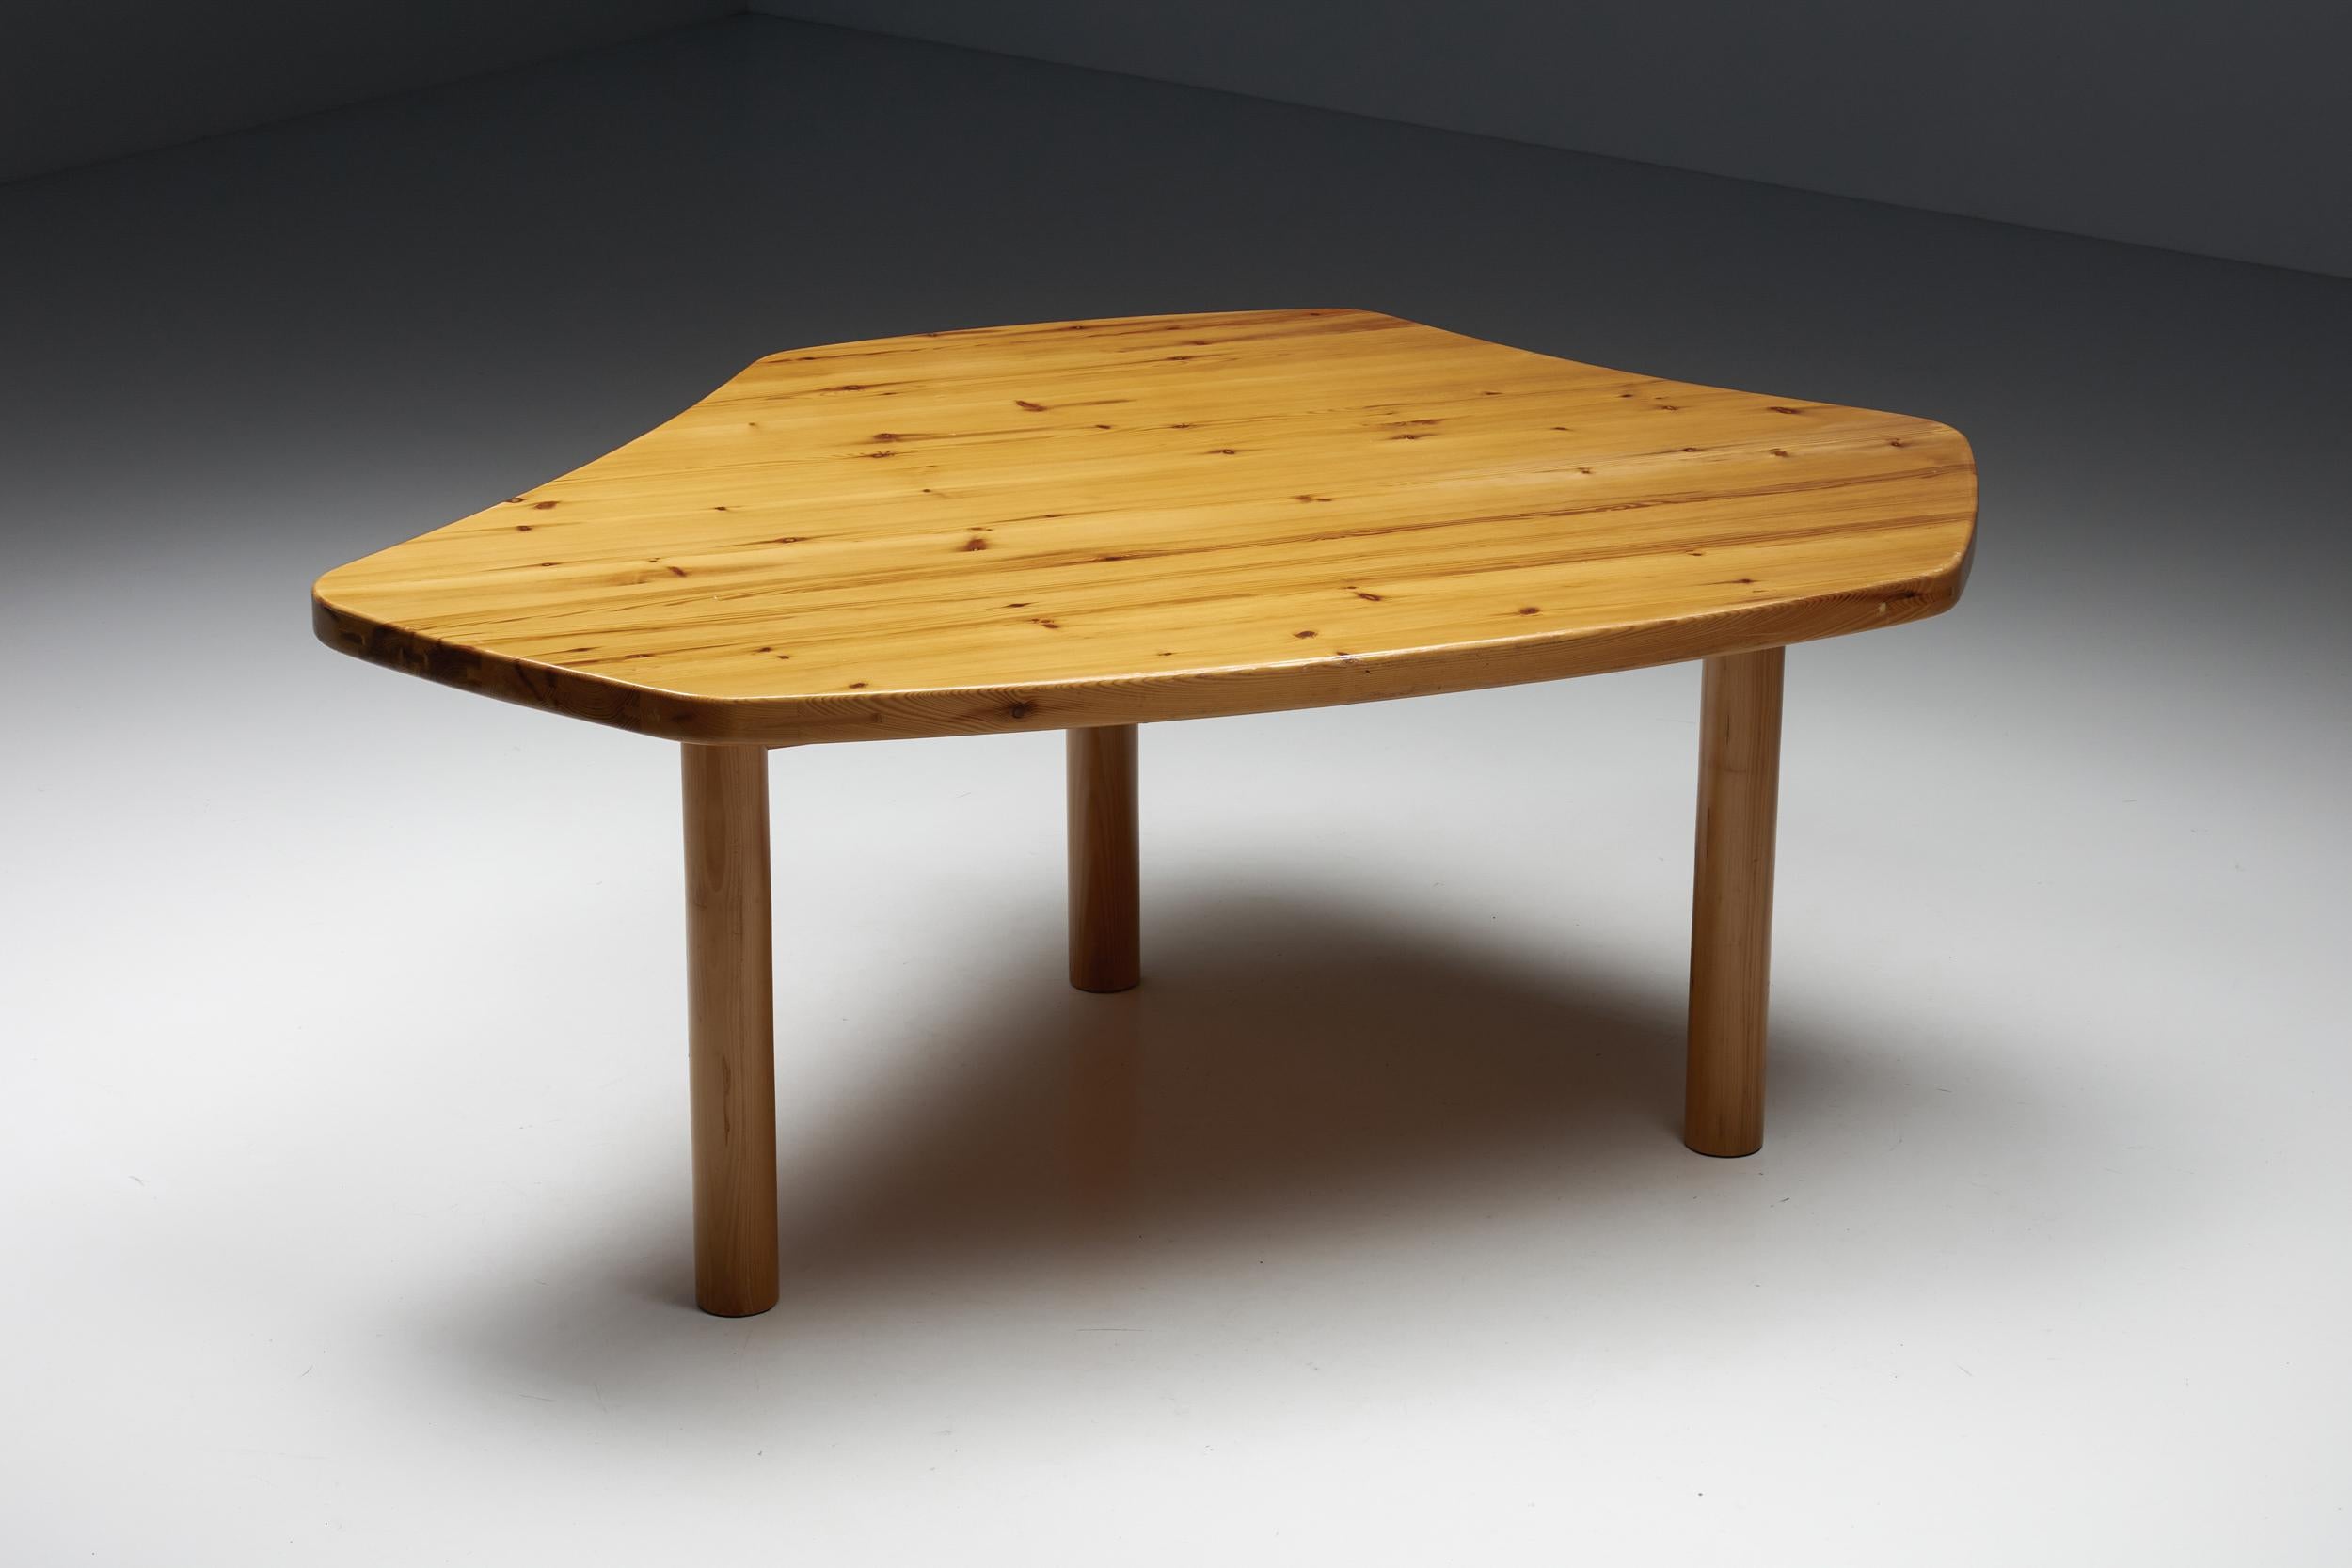 Atelier Franc, ais Perriand Les Arcs Style Dining Table, 1960's.

Wooden dining table made in France in the 1960s. The tabletop is curved very freely, it feels organic yet also geometrical. Can seat up to 5/6 people comfortably. The remarkable